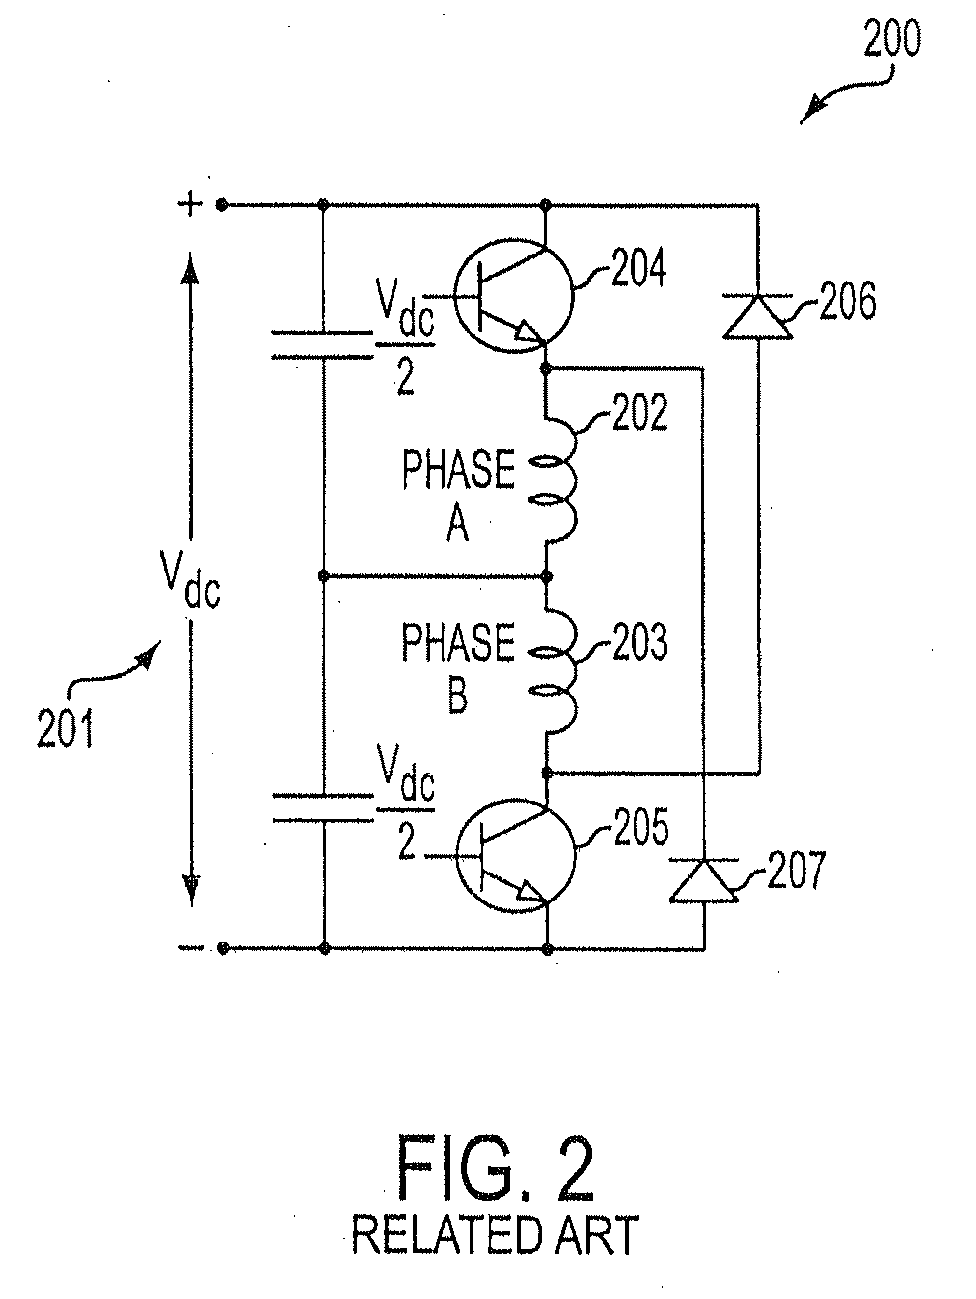 Method, apparatus, and system for drive control, power conversion, and start-up control in an srm or pmbdcm drive system